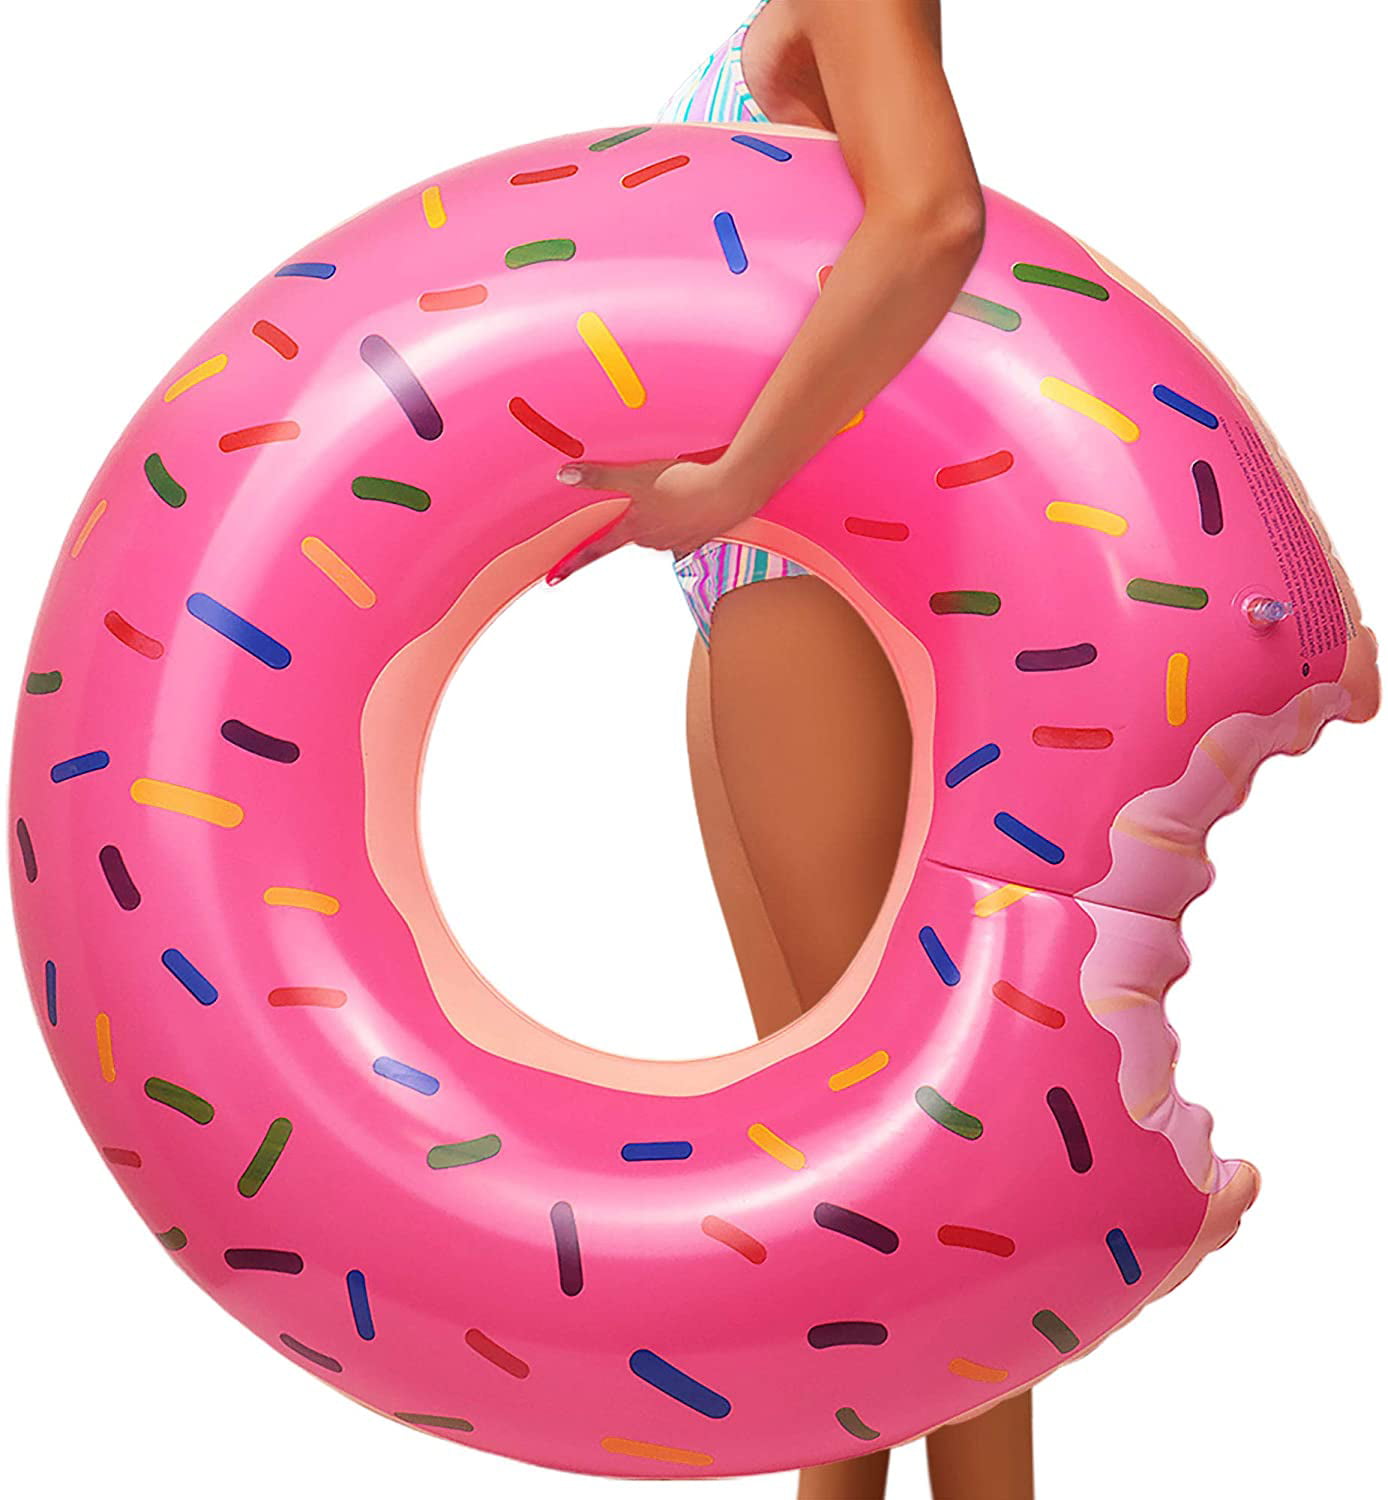 Large Donut Swimming Pool Swim Ring Beach Toys Inflatable Float for Kids Adult 